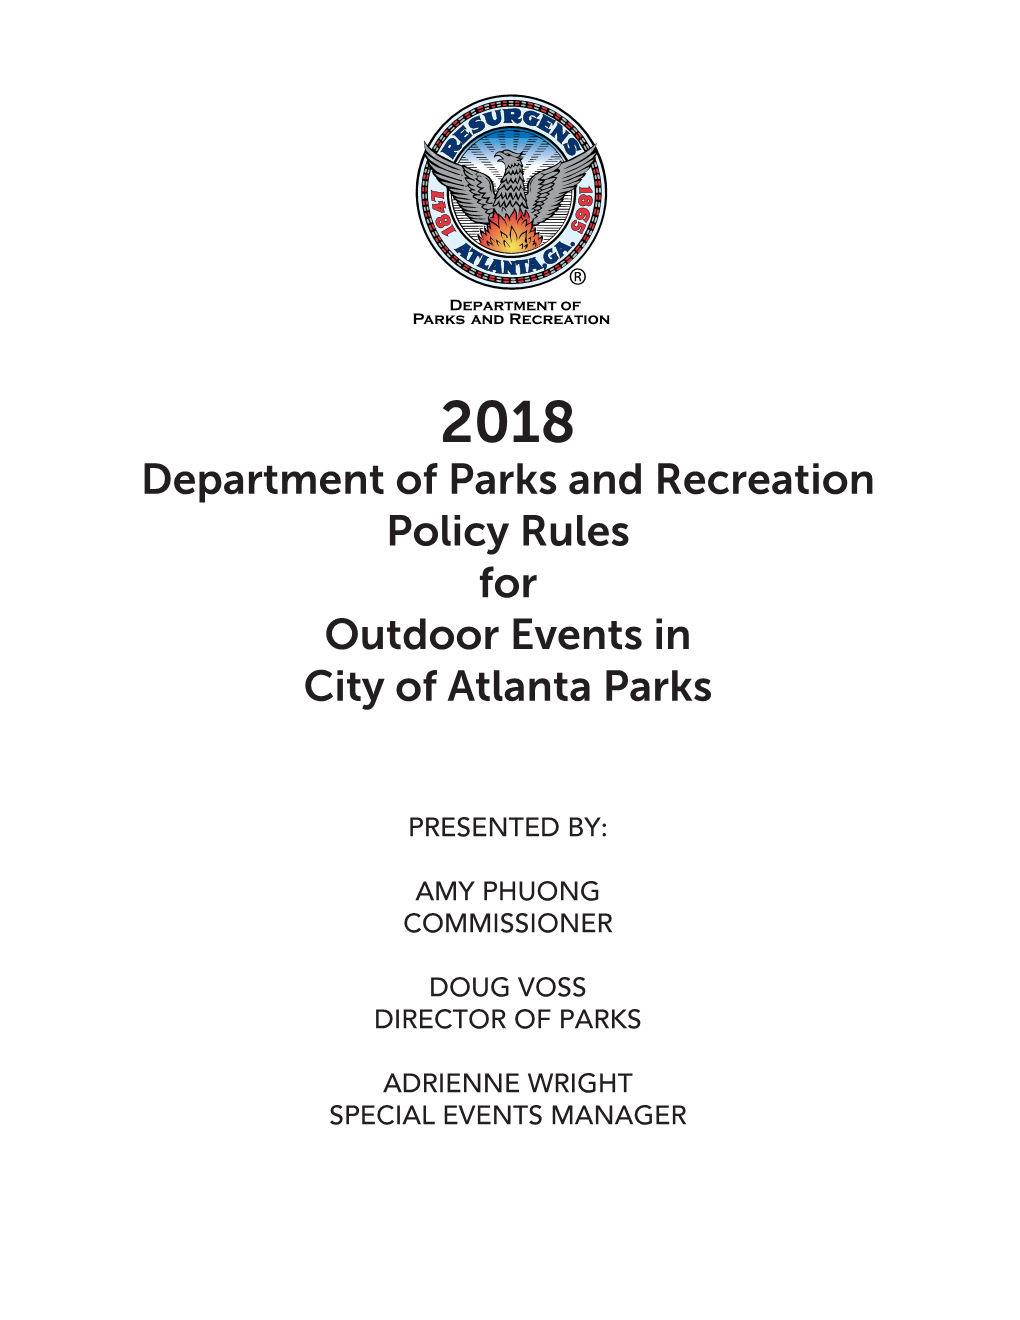 Department of Parks and Recreation Policy Rules for Outdoor Events in City of Atlanta Parks